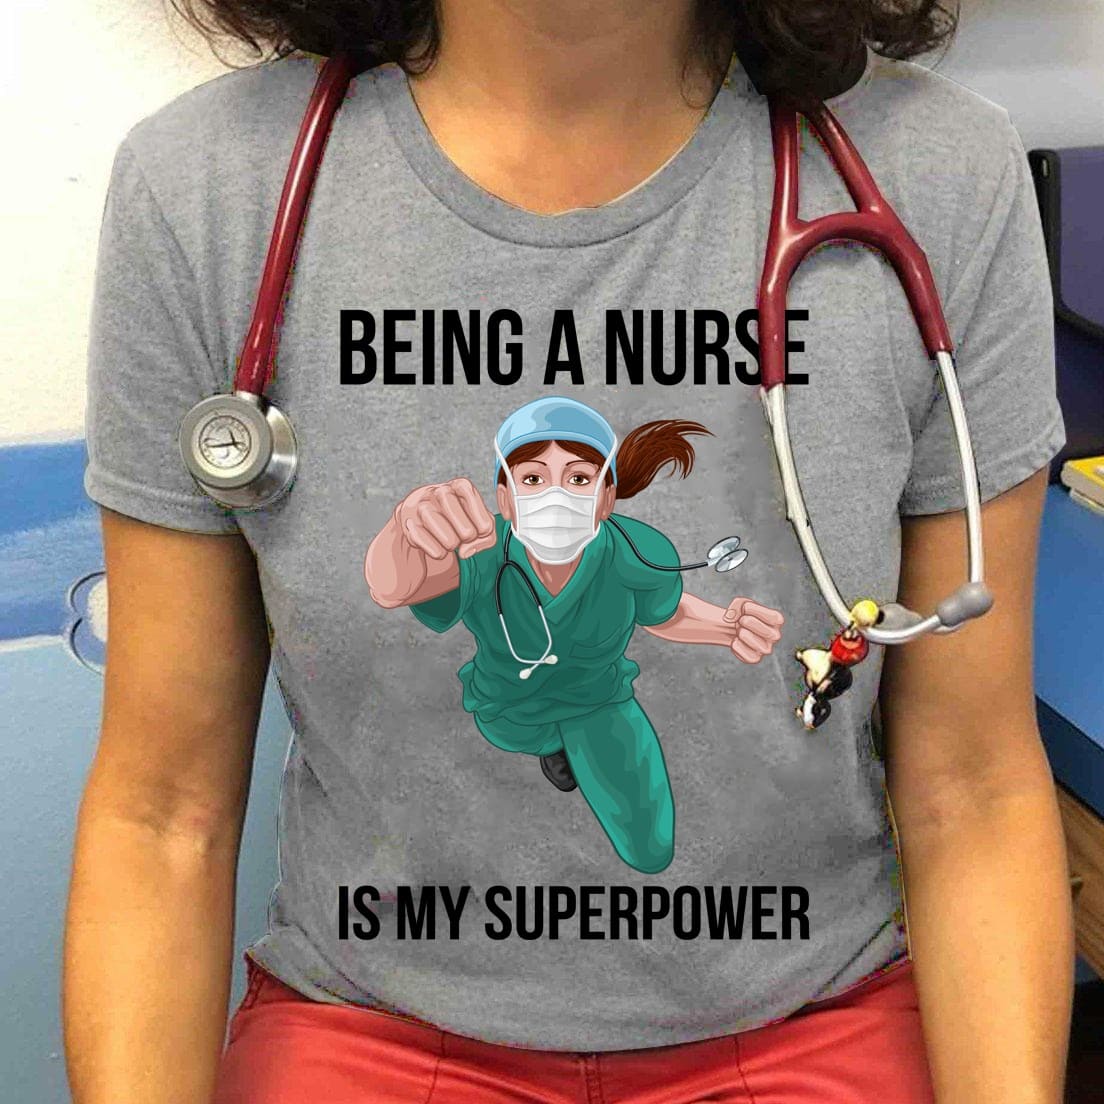 Being a nurse is my superpower - Nursing the job, Covid-19 pandemic